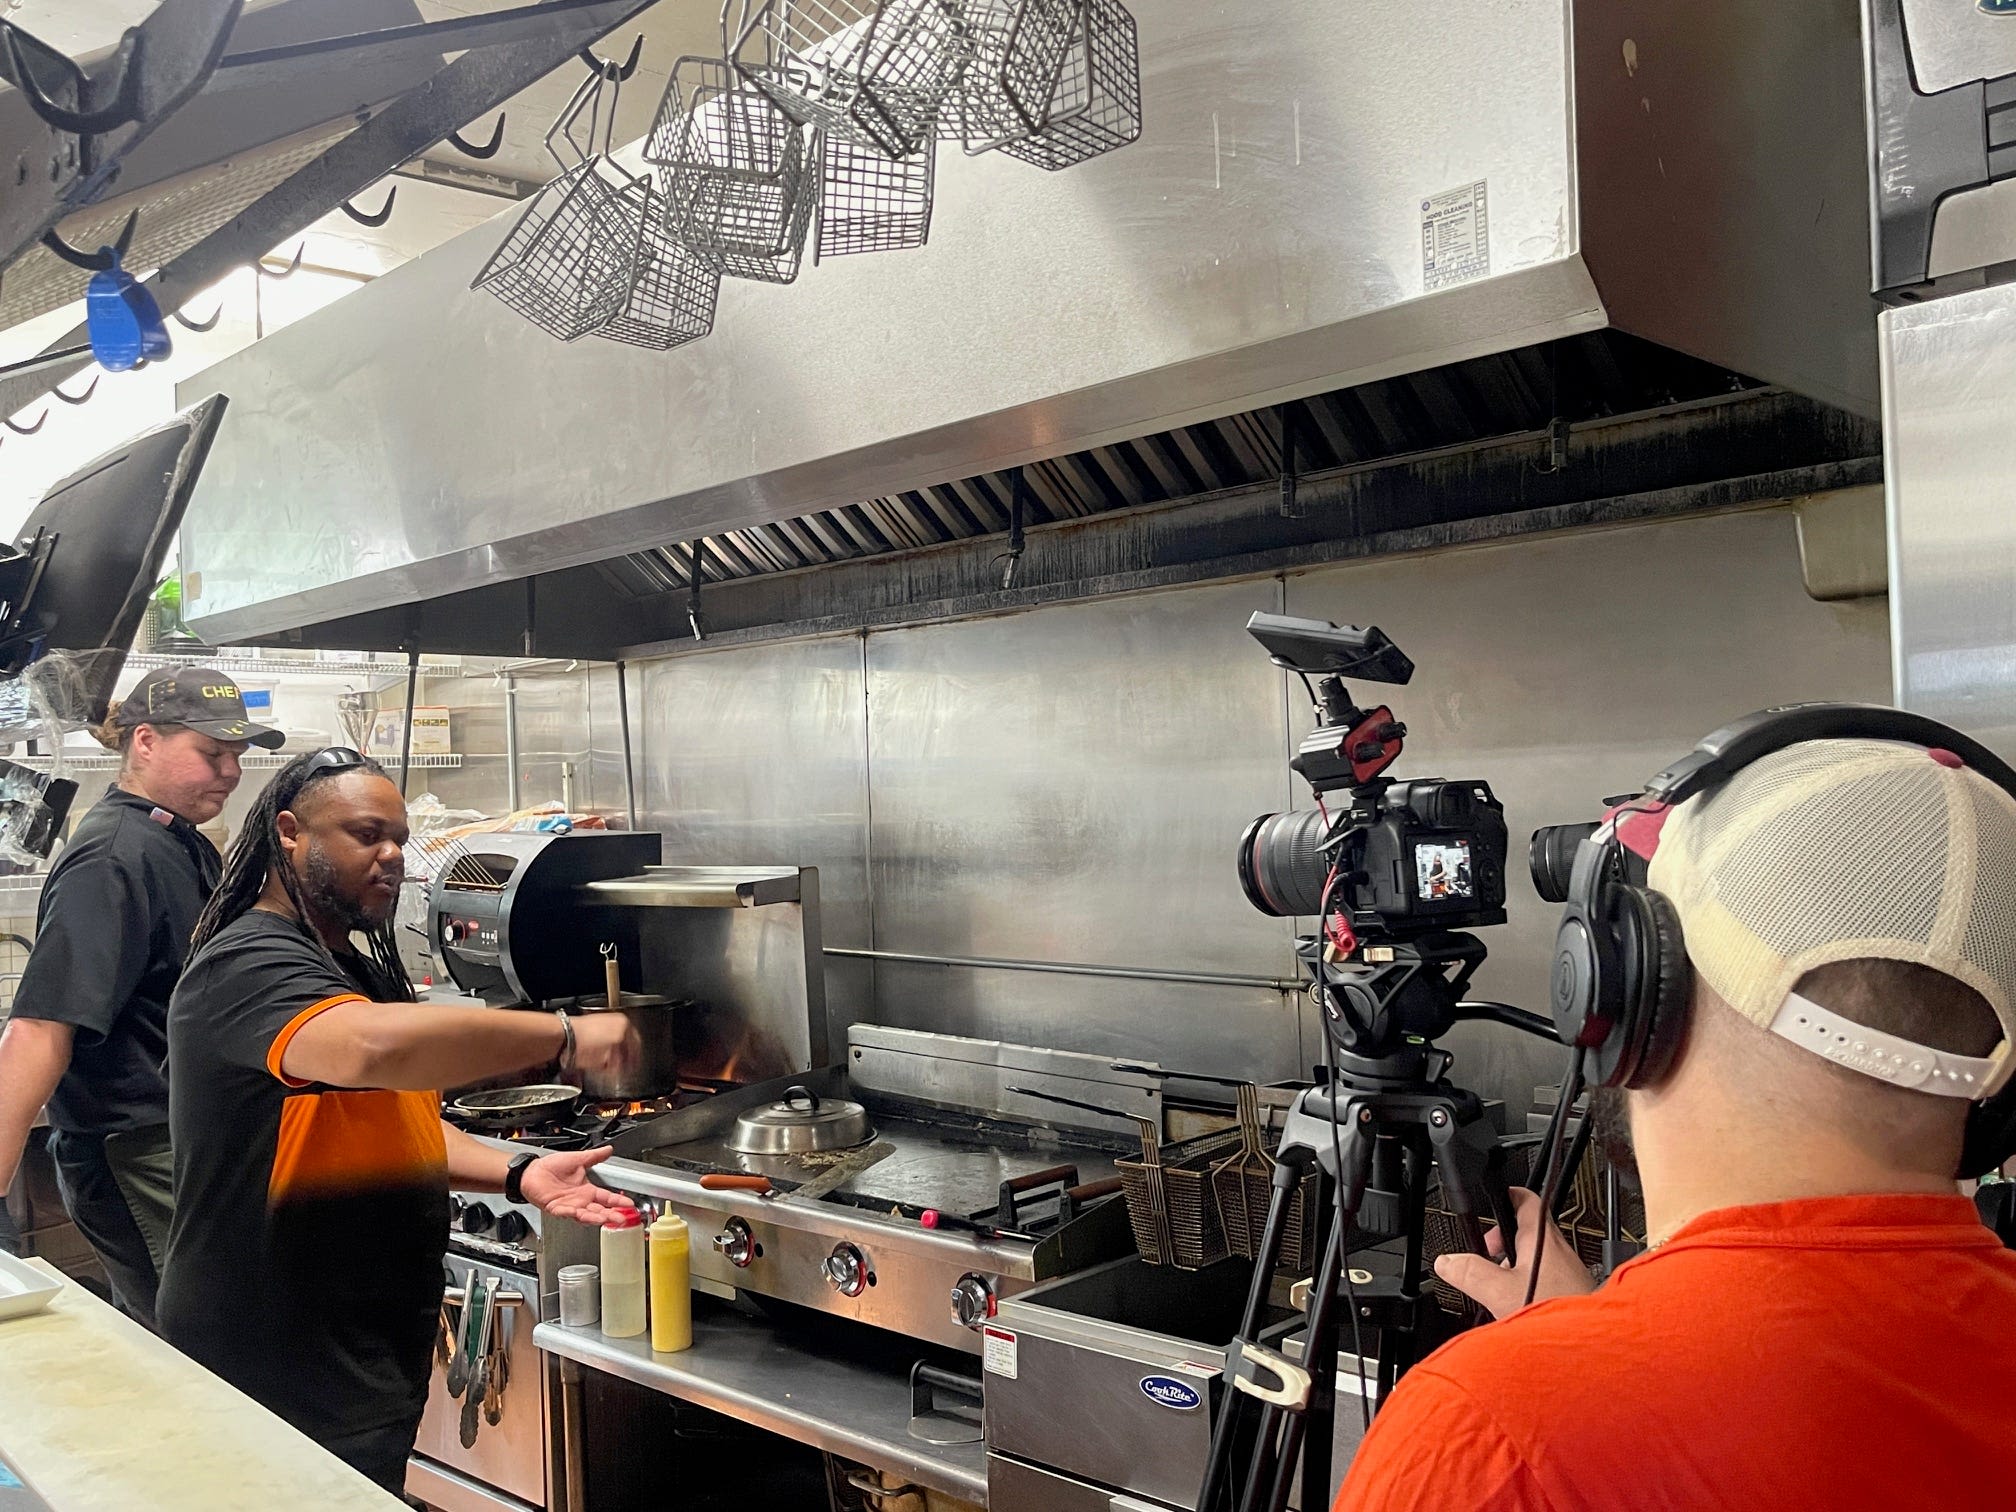 Why did a video crew visit Coal Miner's Diner in Jennerstown?